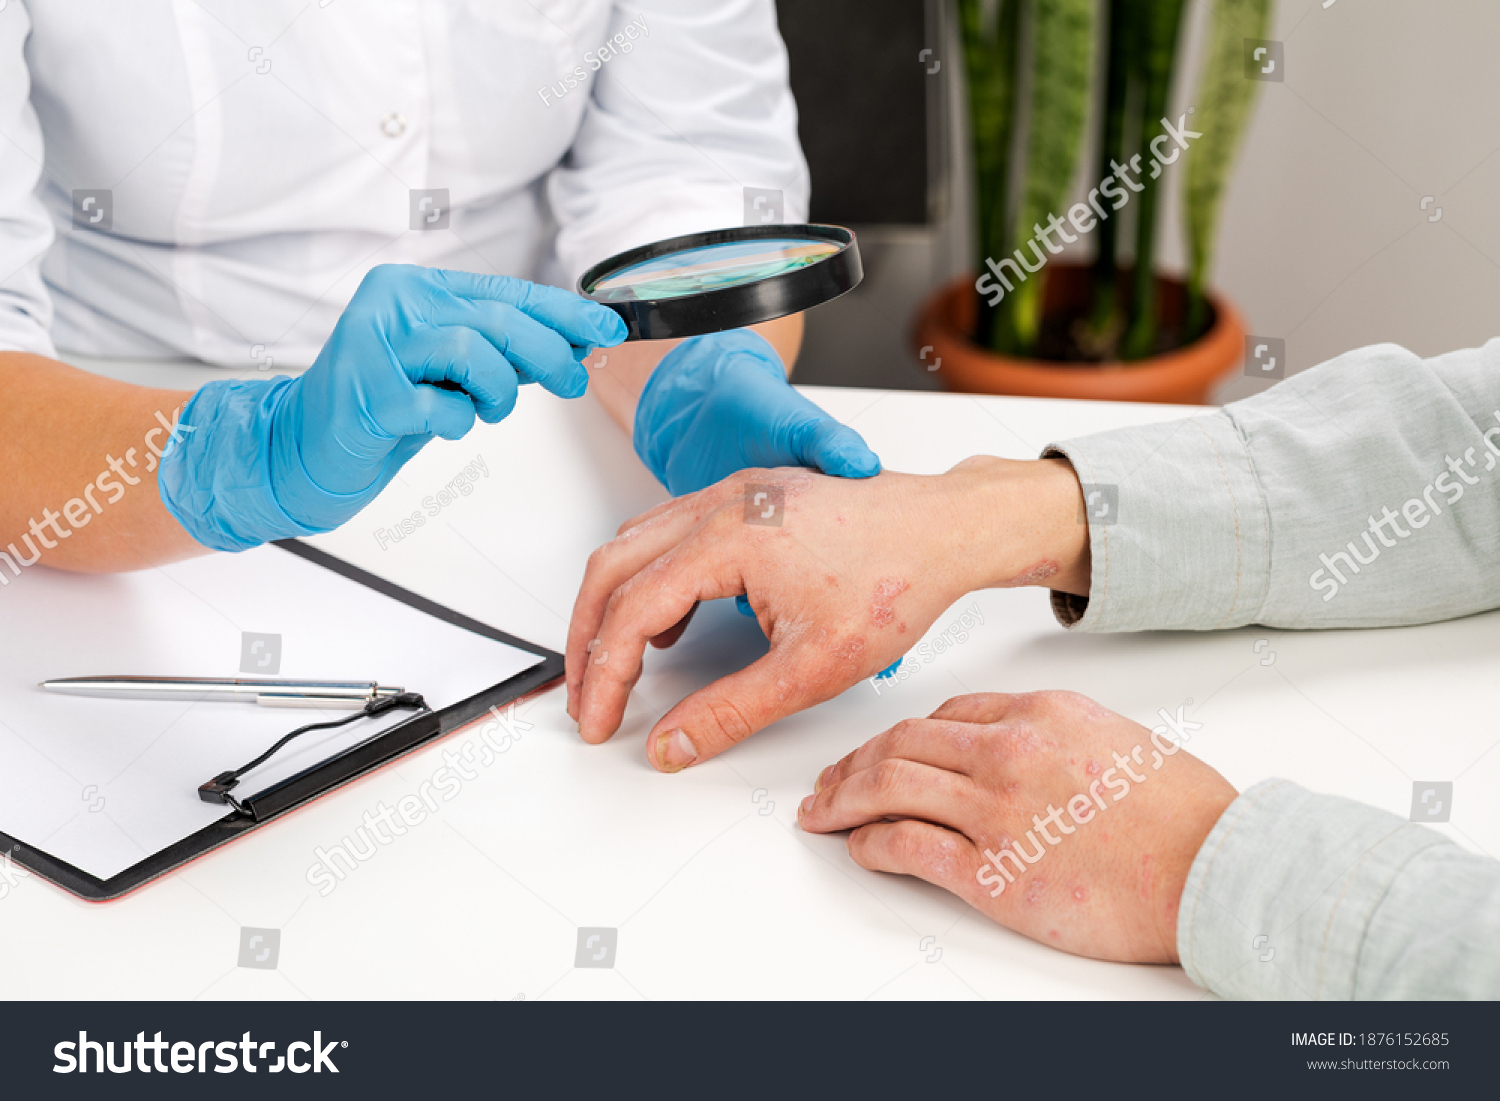 A dermatologist wearing gloves examines the skin of a sick patient. Examination and diagnosis of skin diseases-allergies, psoriasis, eczema, dermatitis. #1876152685